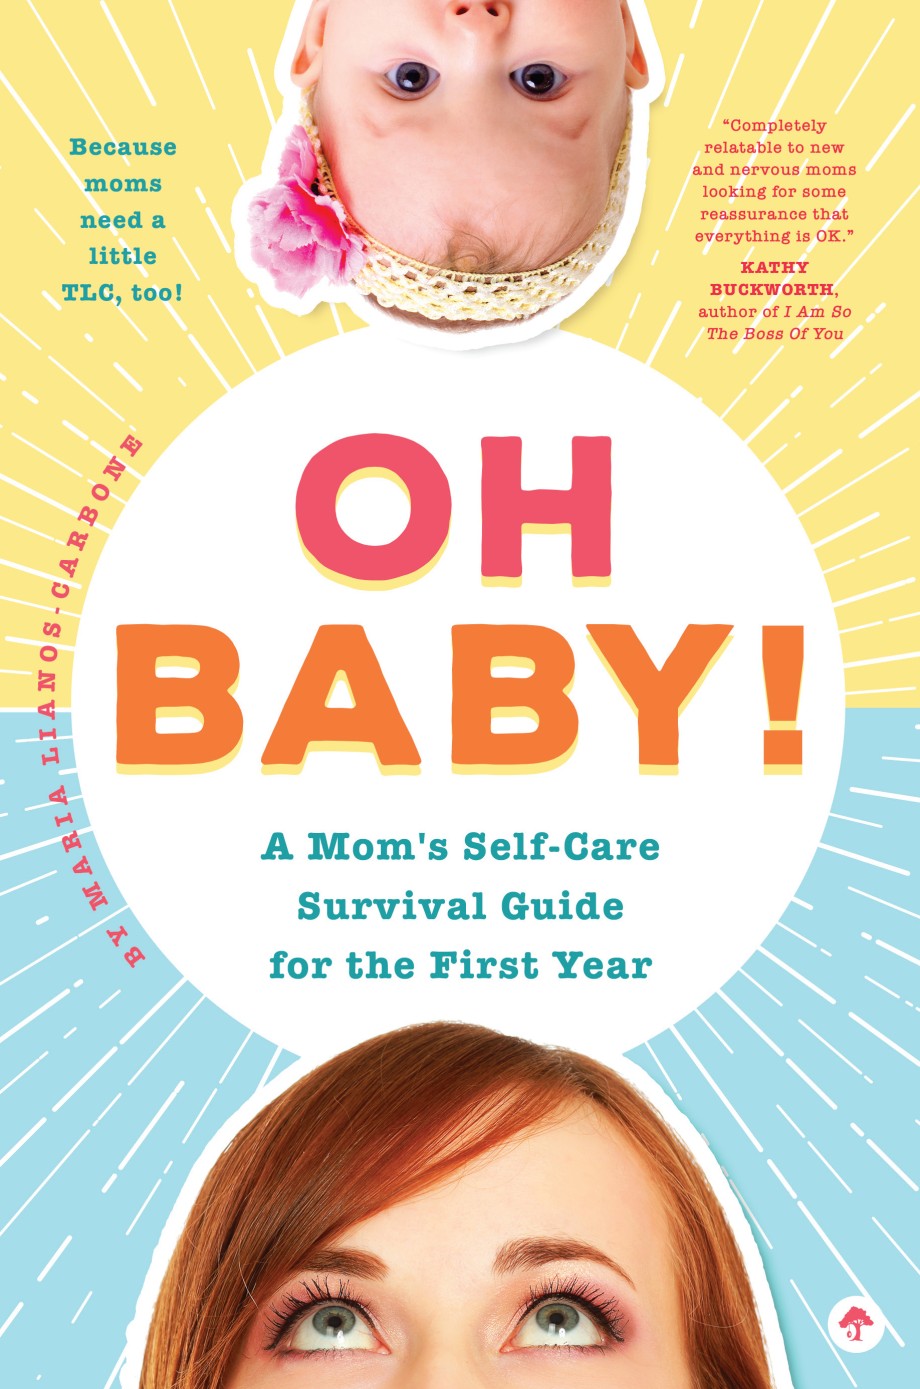 Oh Baby! A Mom's Self-Care Survival Guide for the First Year Because Moms Need a Little TLC, Too!